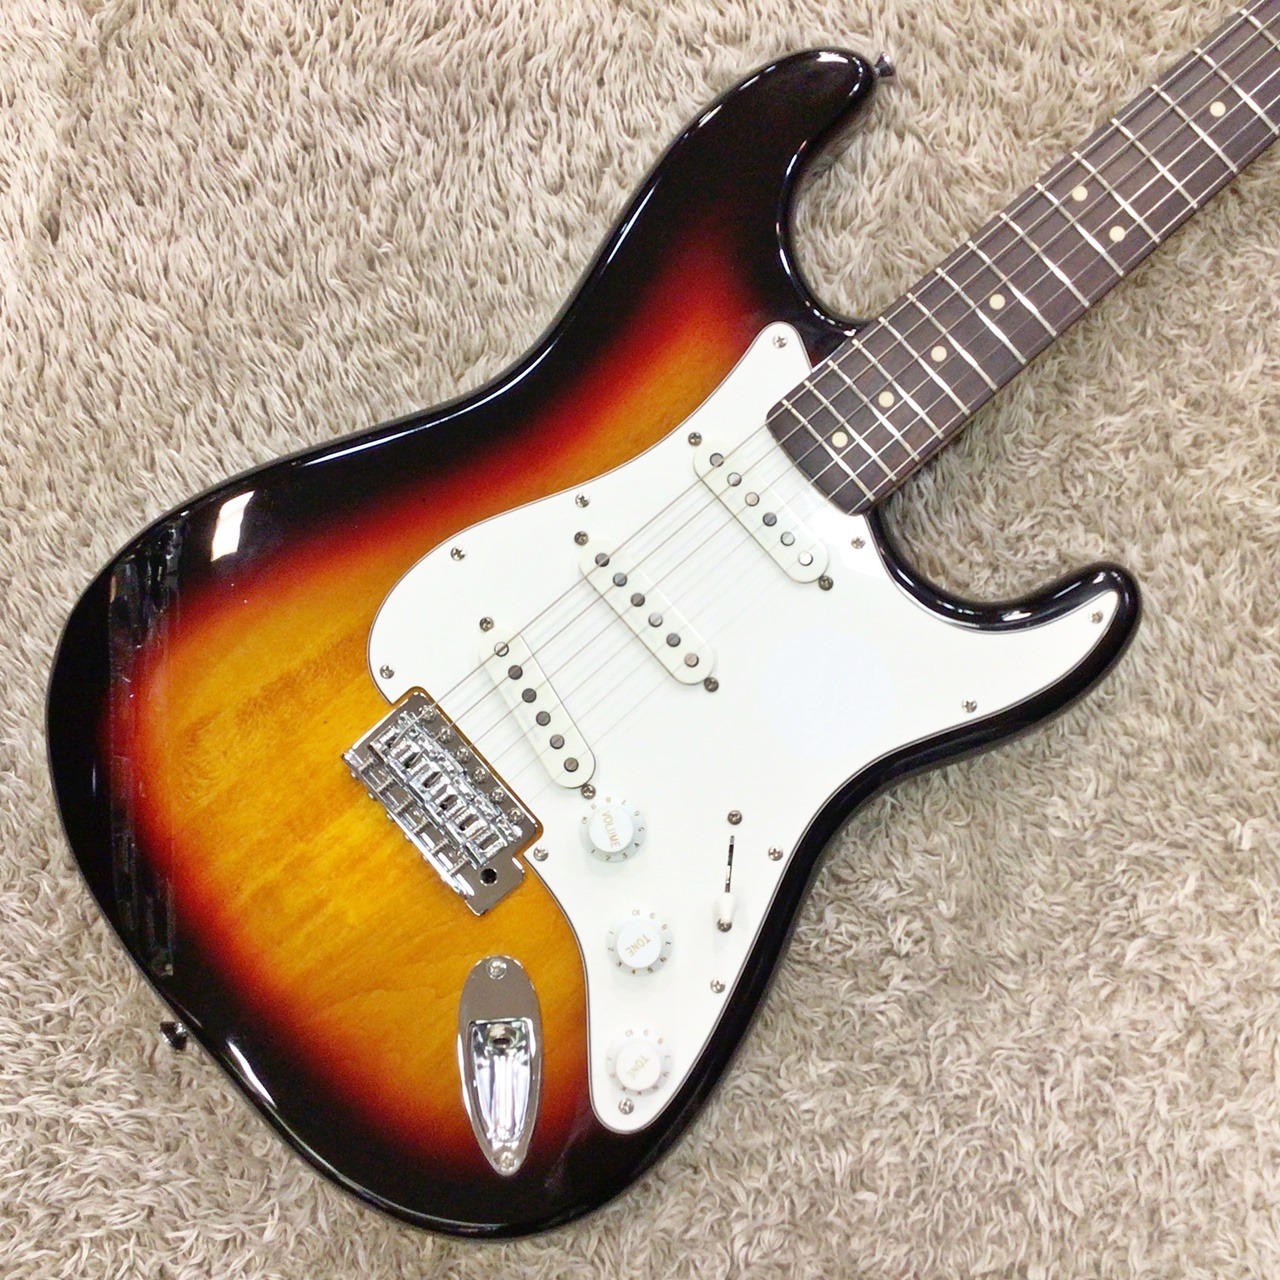 Squier Vintage Modified Stratocaster VBL - ギター